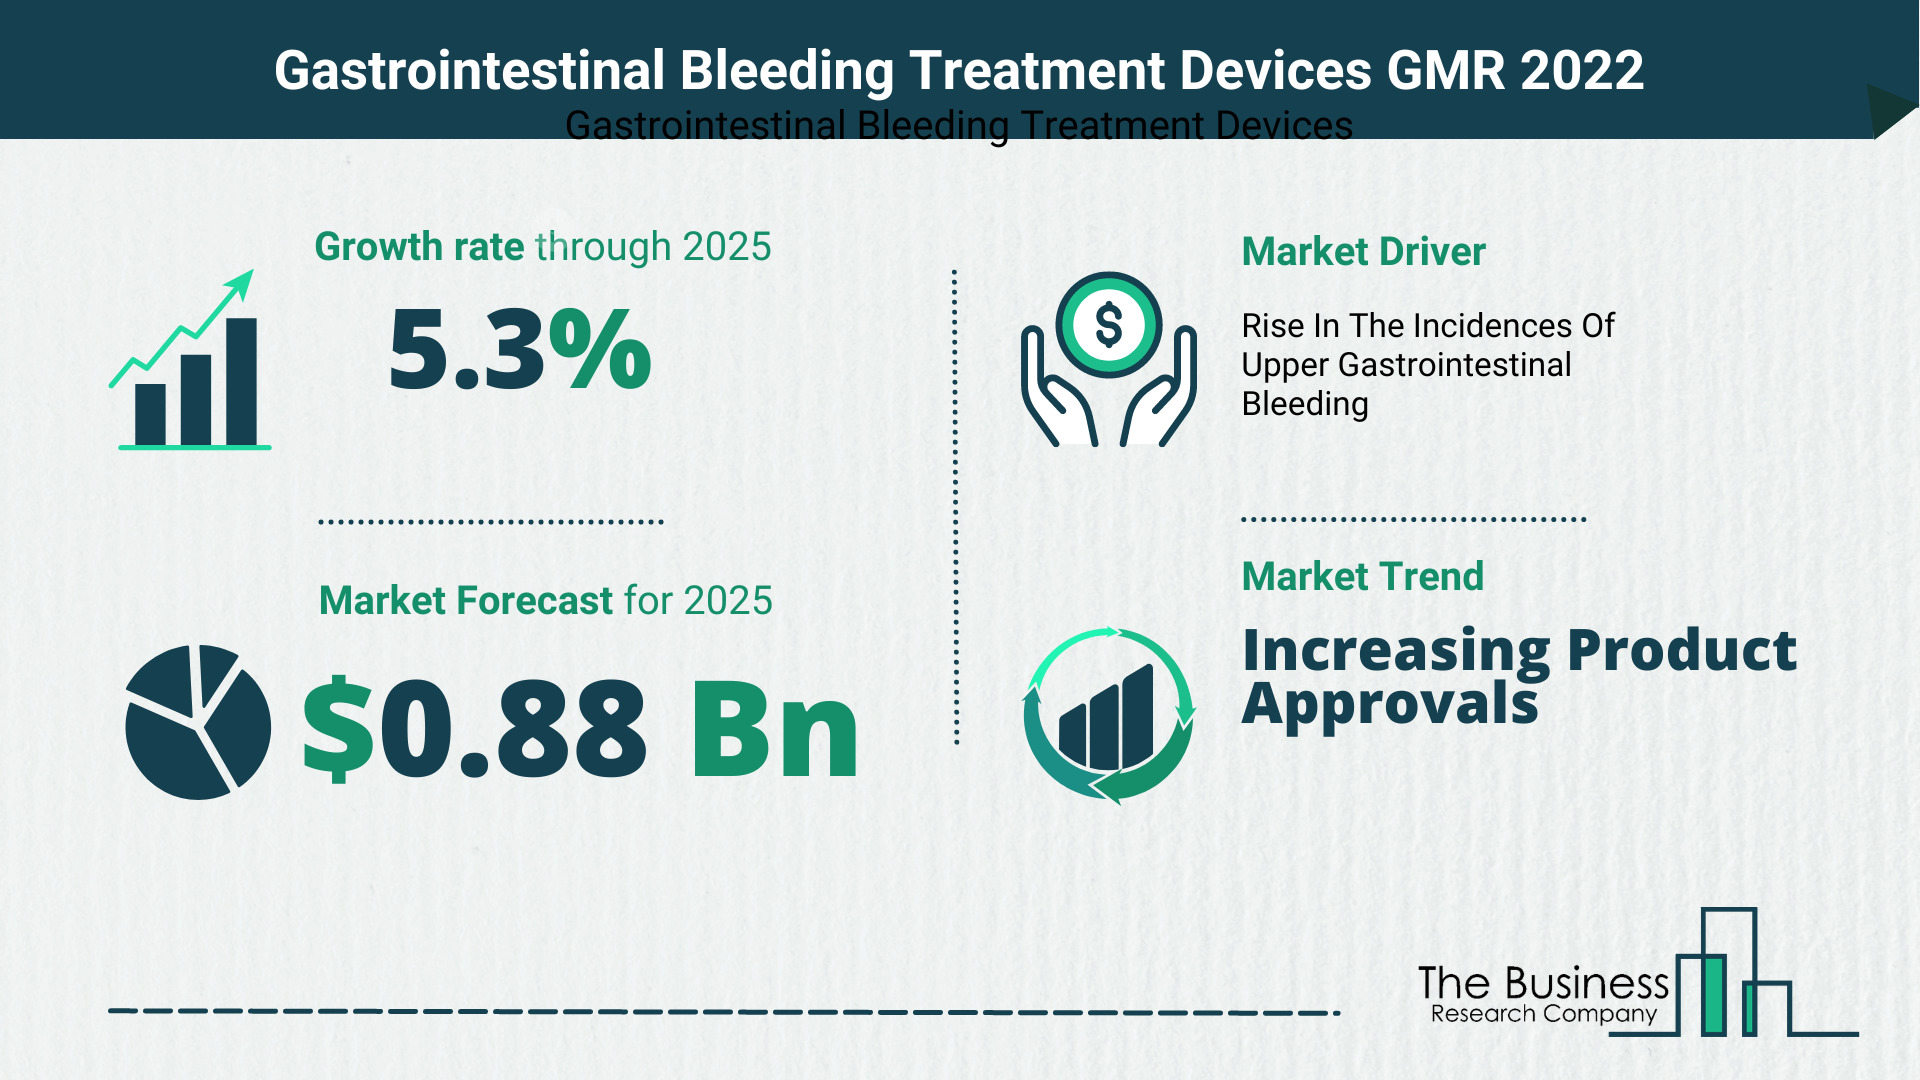 Latest Gastrointestinal Bleeding Treatment Market Growth Study 2022-2026 By The Business Research Company